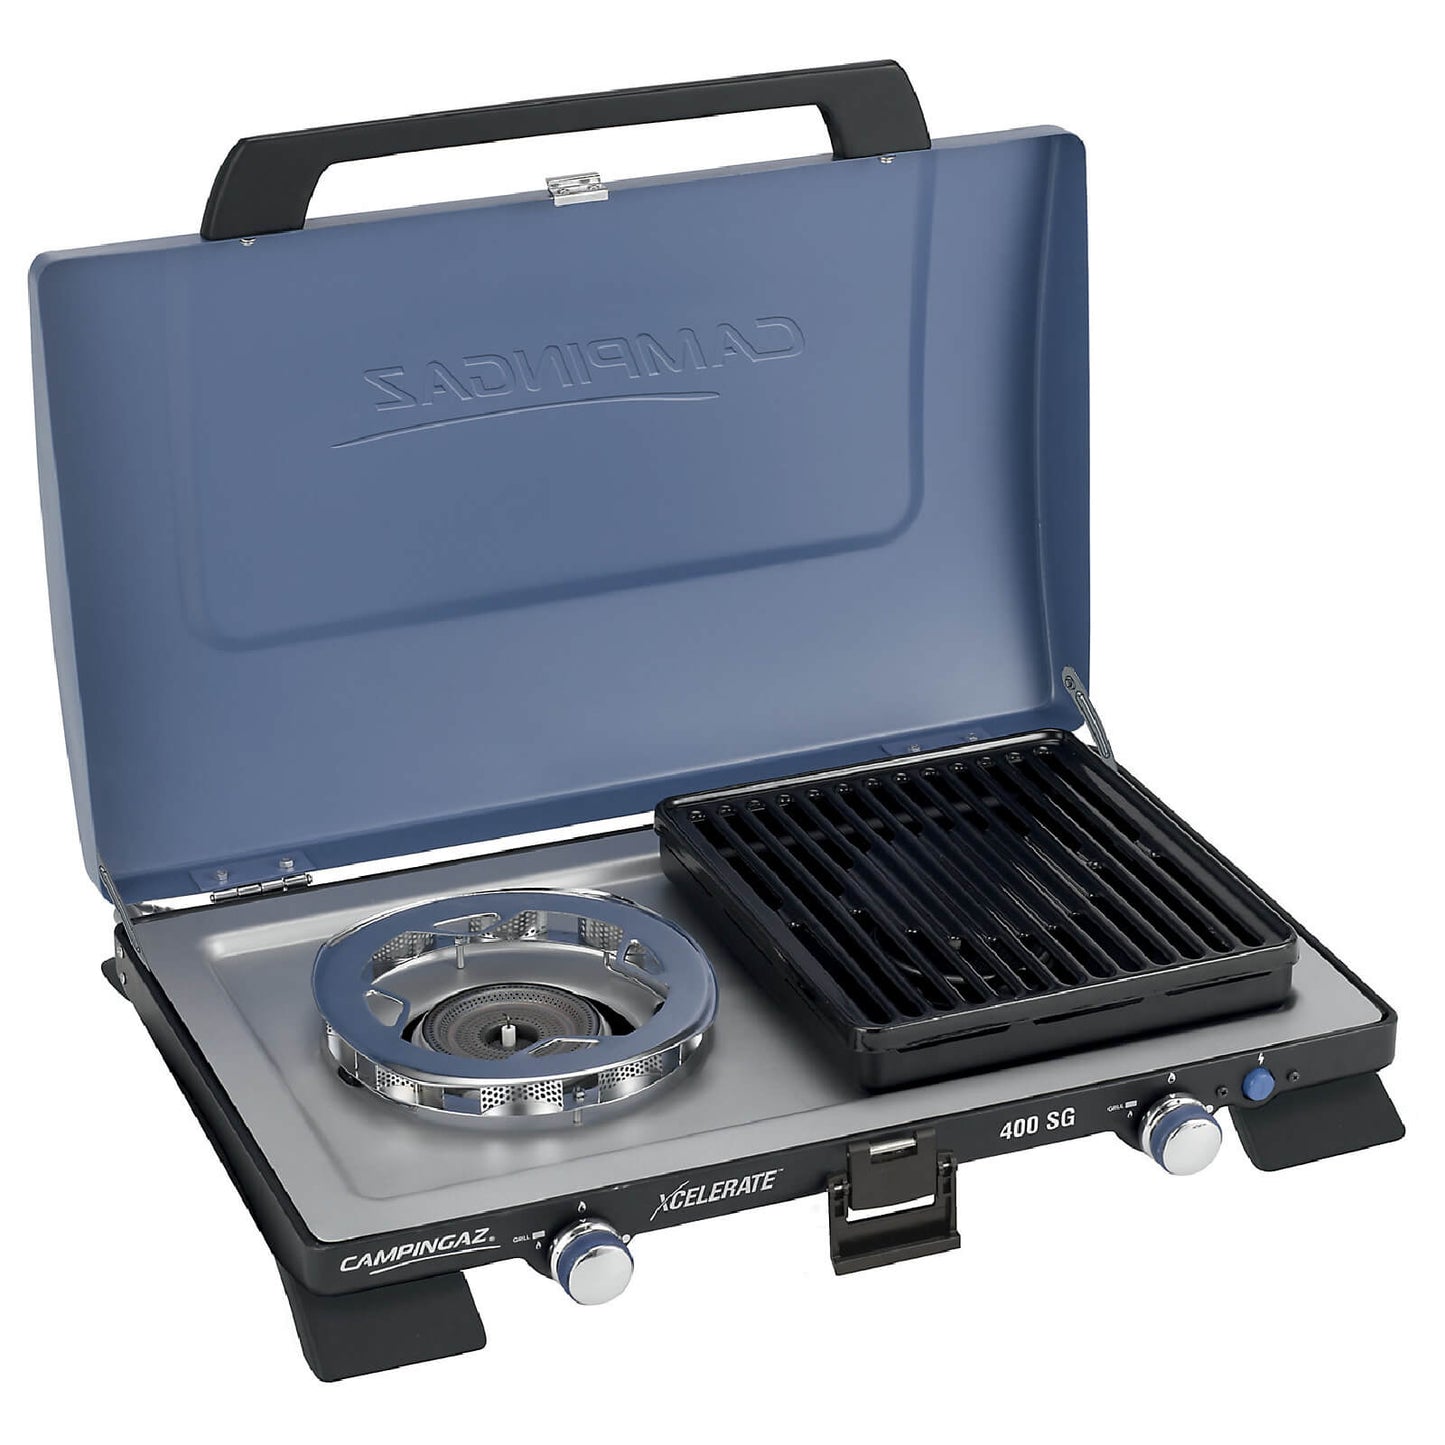 Camping Cooking Stove Campingaz Series 400 SG Double Burner & Grill Portable Gas